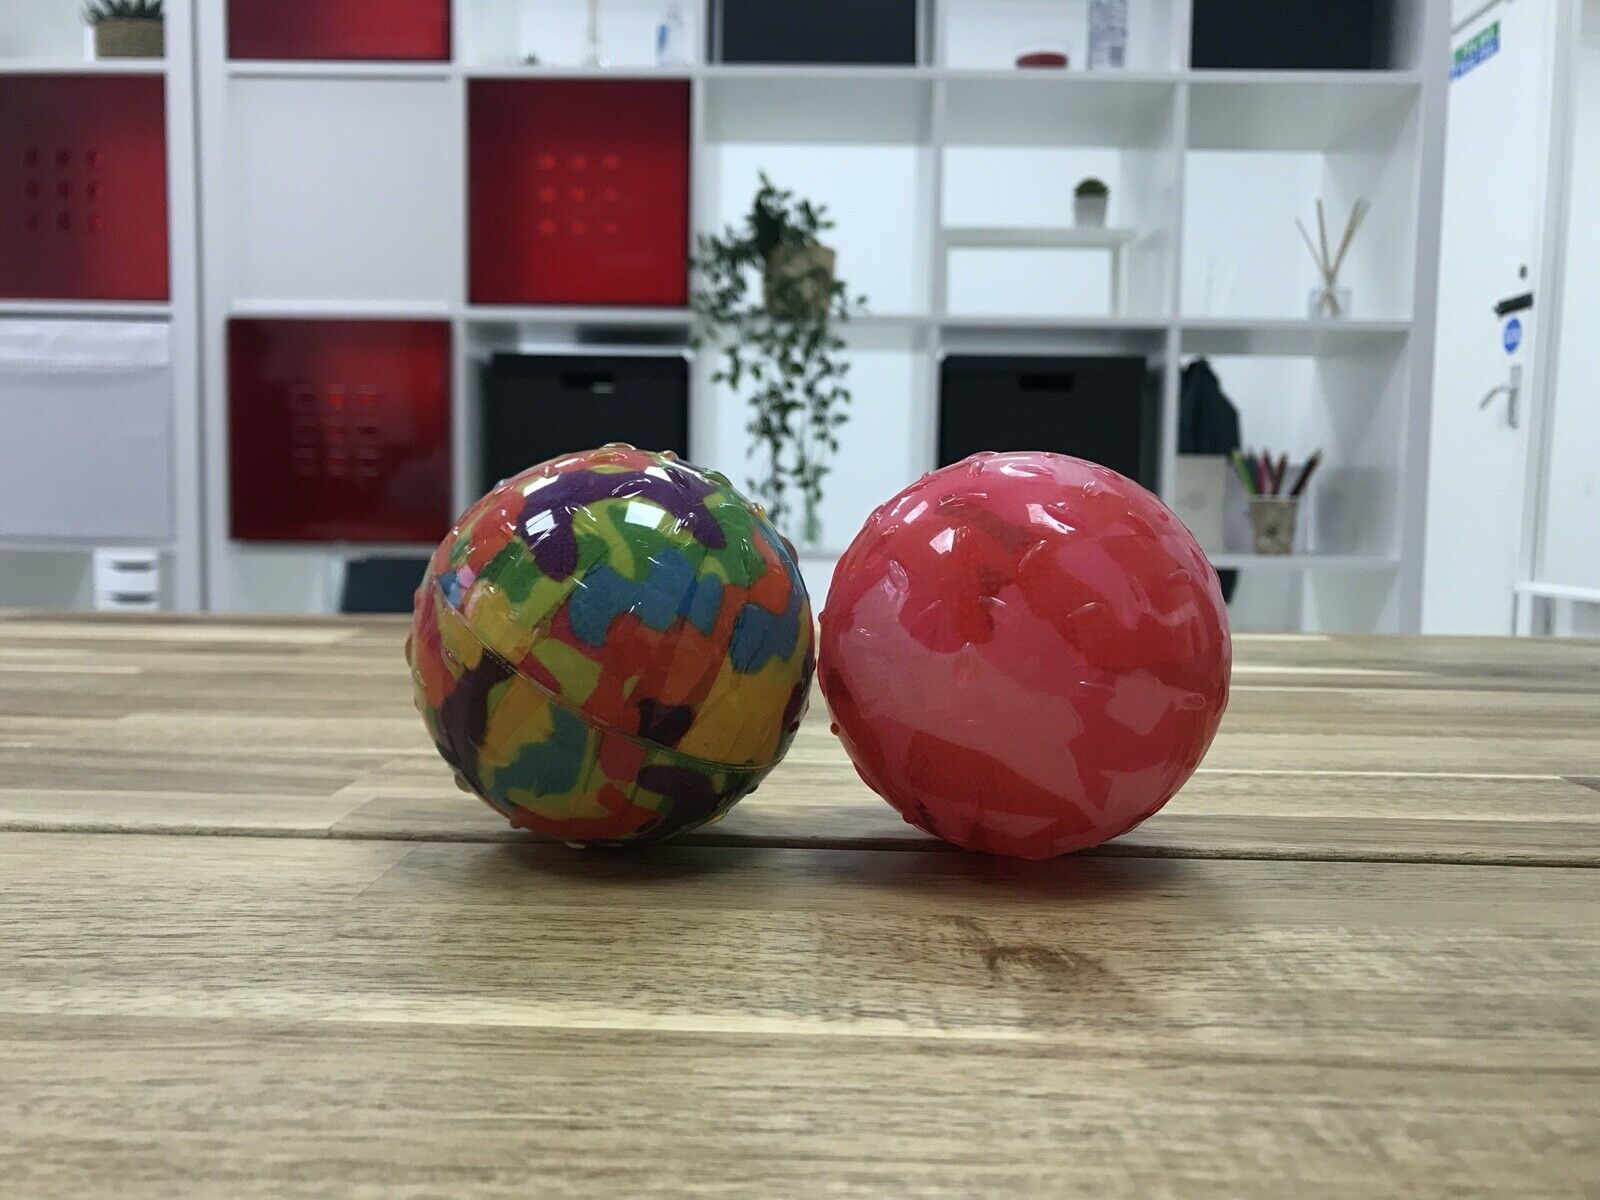 Dog Ball Bouncy Sound Puppy Pet Funny Toys X 2 Ball